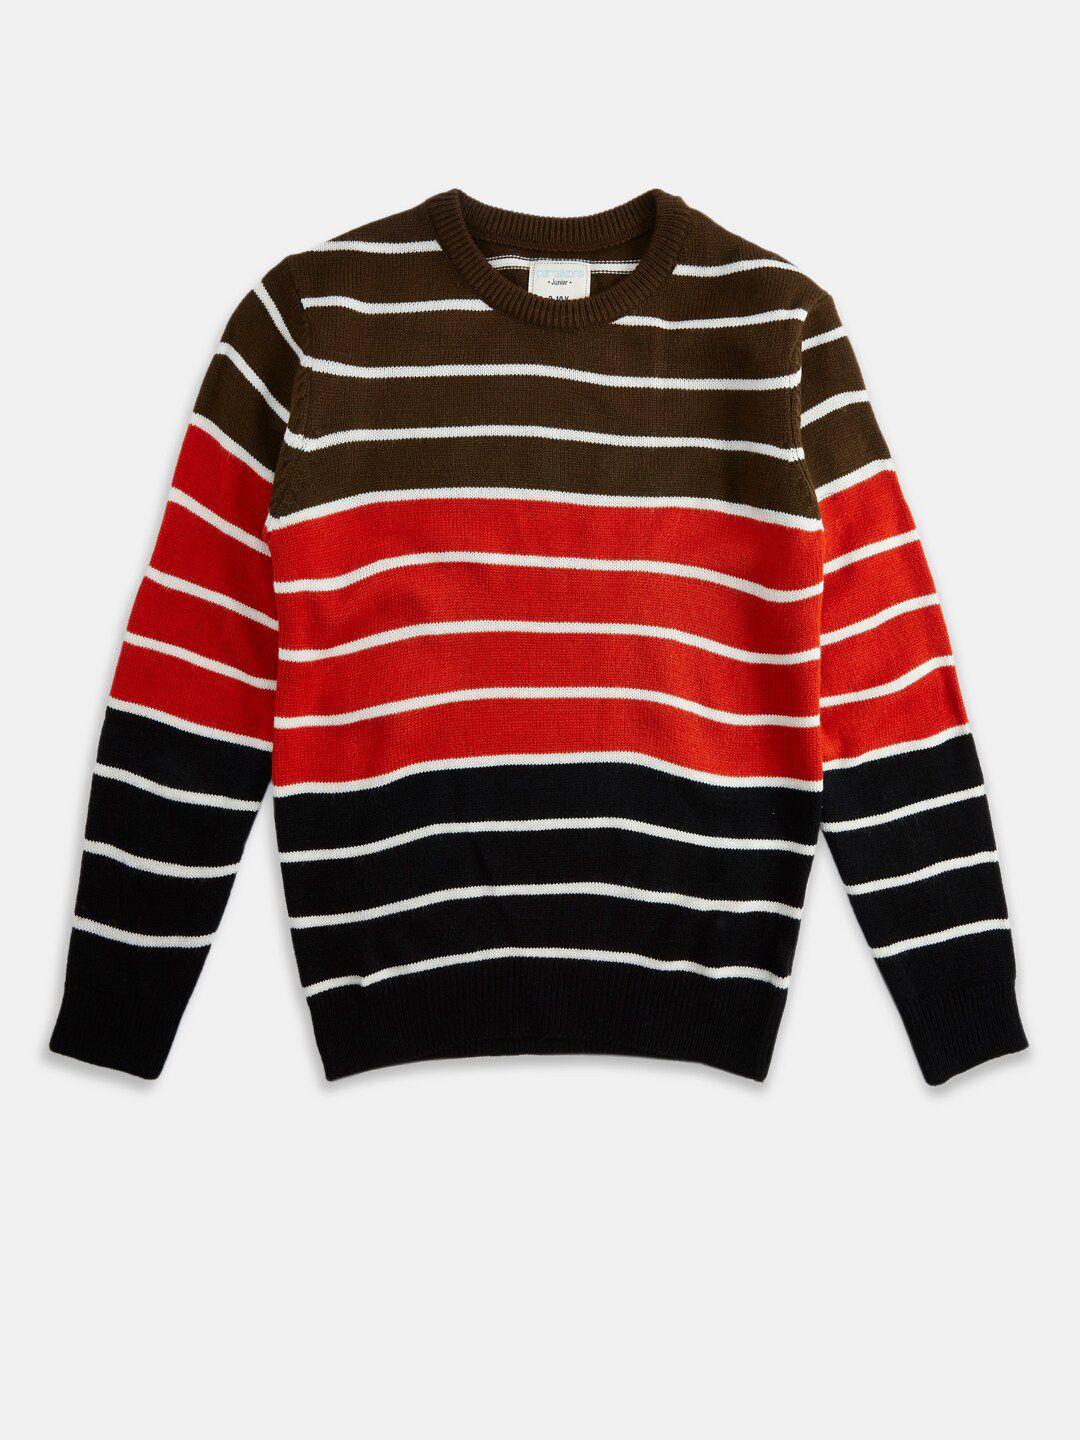 pantaloons junior boys olive green & red striped pullover sweater